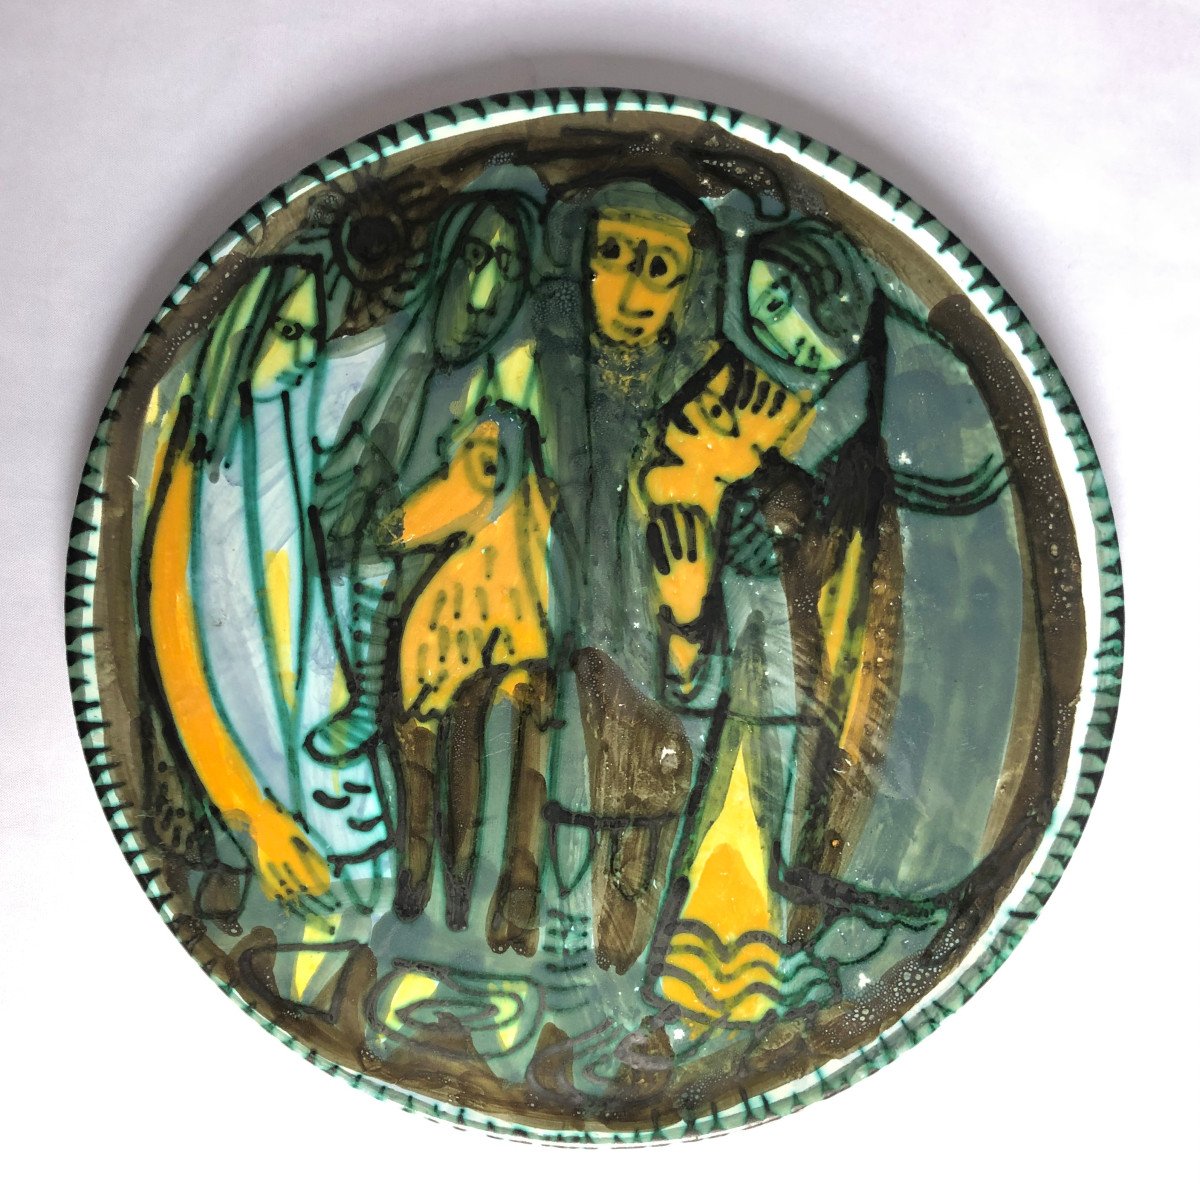 Tray Titled "after Midnight The Shadows Of The Dead" By René Quéré - Manufacture Kéraluc Bretagne